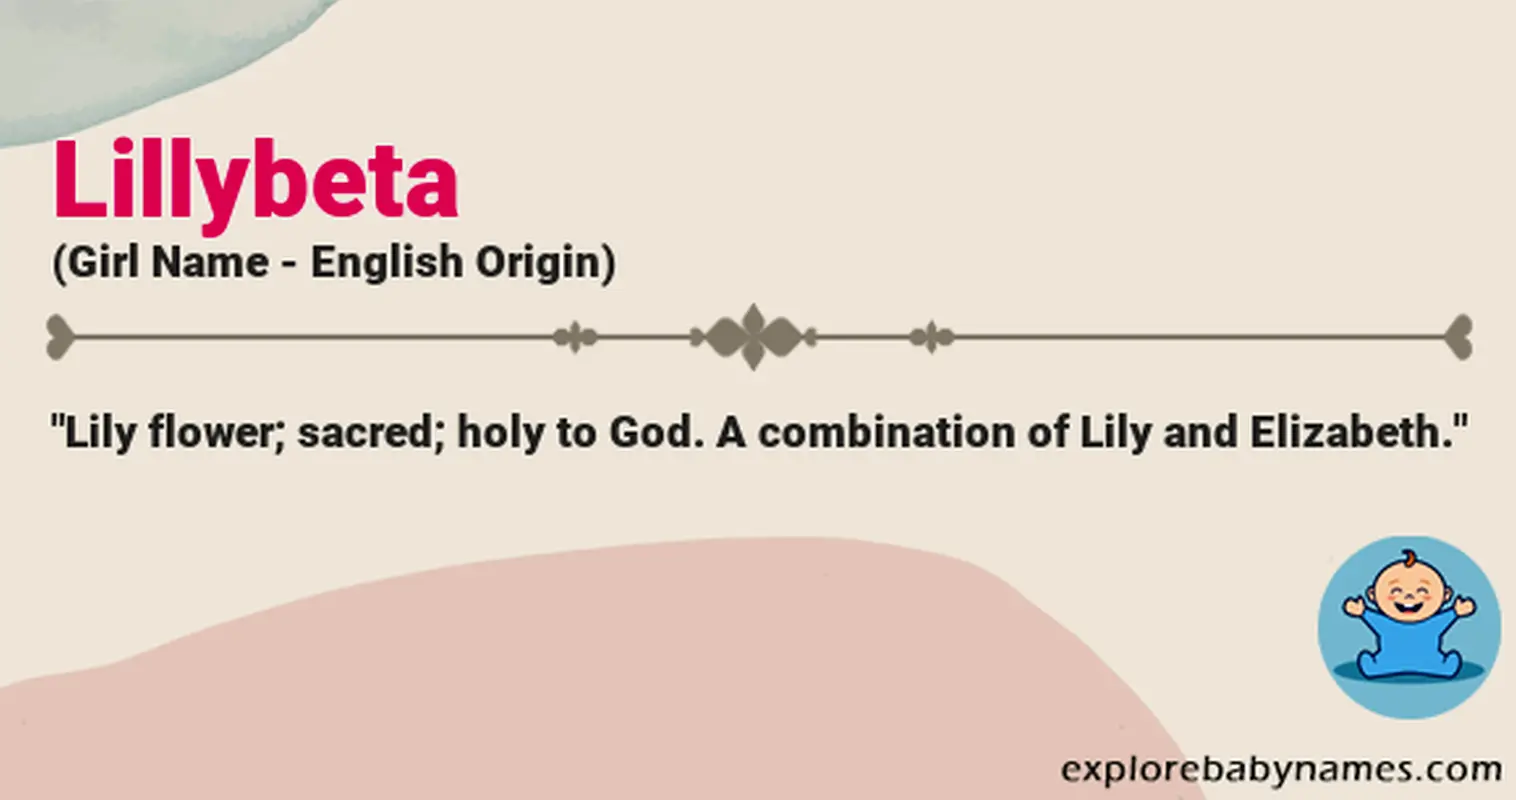 Meaning of Lillybeta